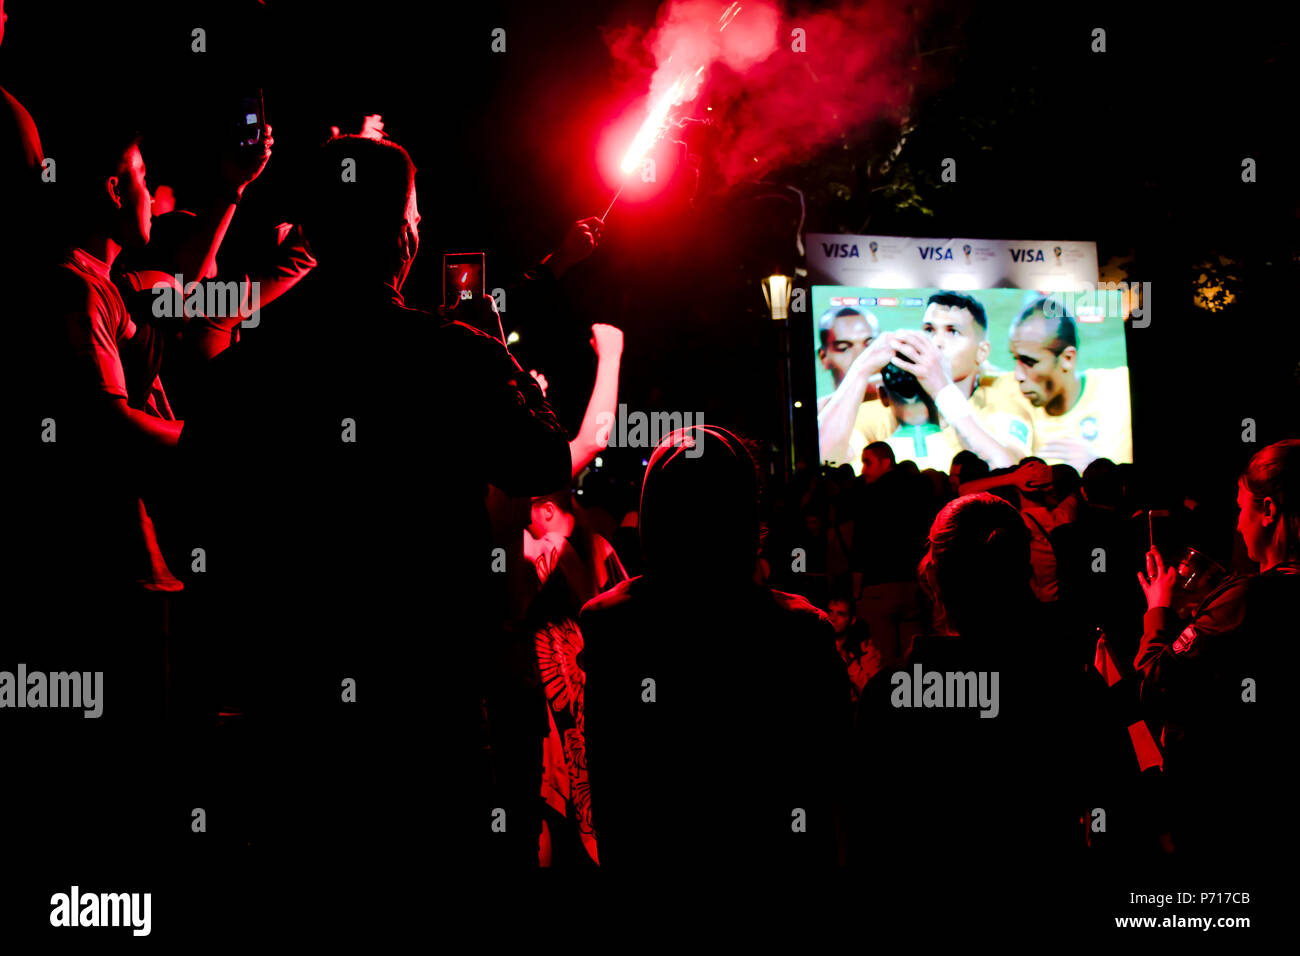 Belgrade, Serbia - June 27, 2018: Crowd of young football fans watching Serbia vs Brasil game in the World cup 2018 on the public huge screen in the s Stock Photo